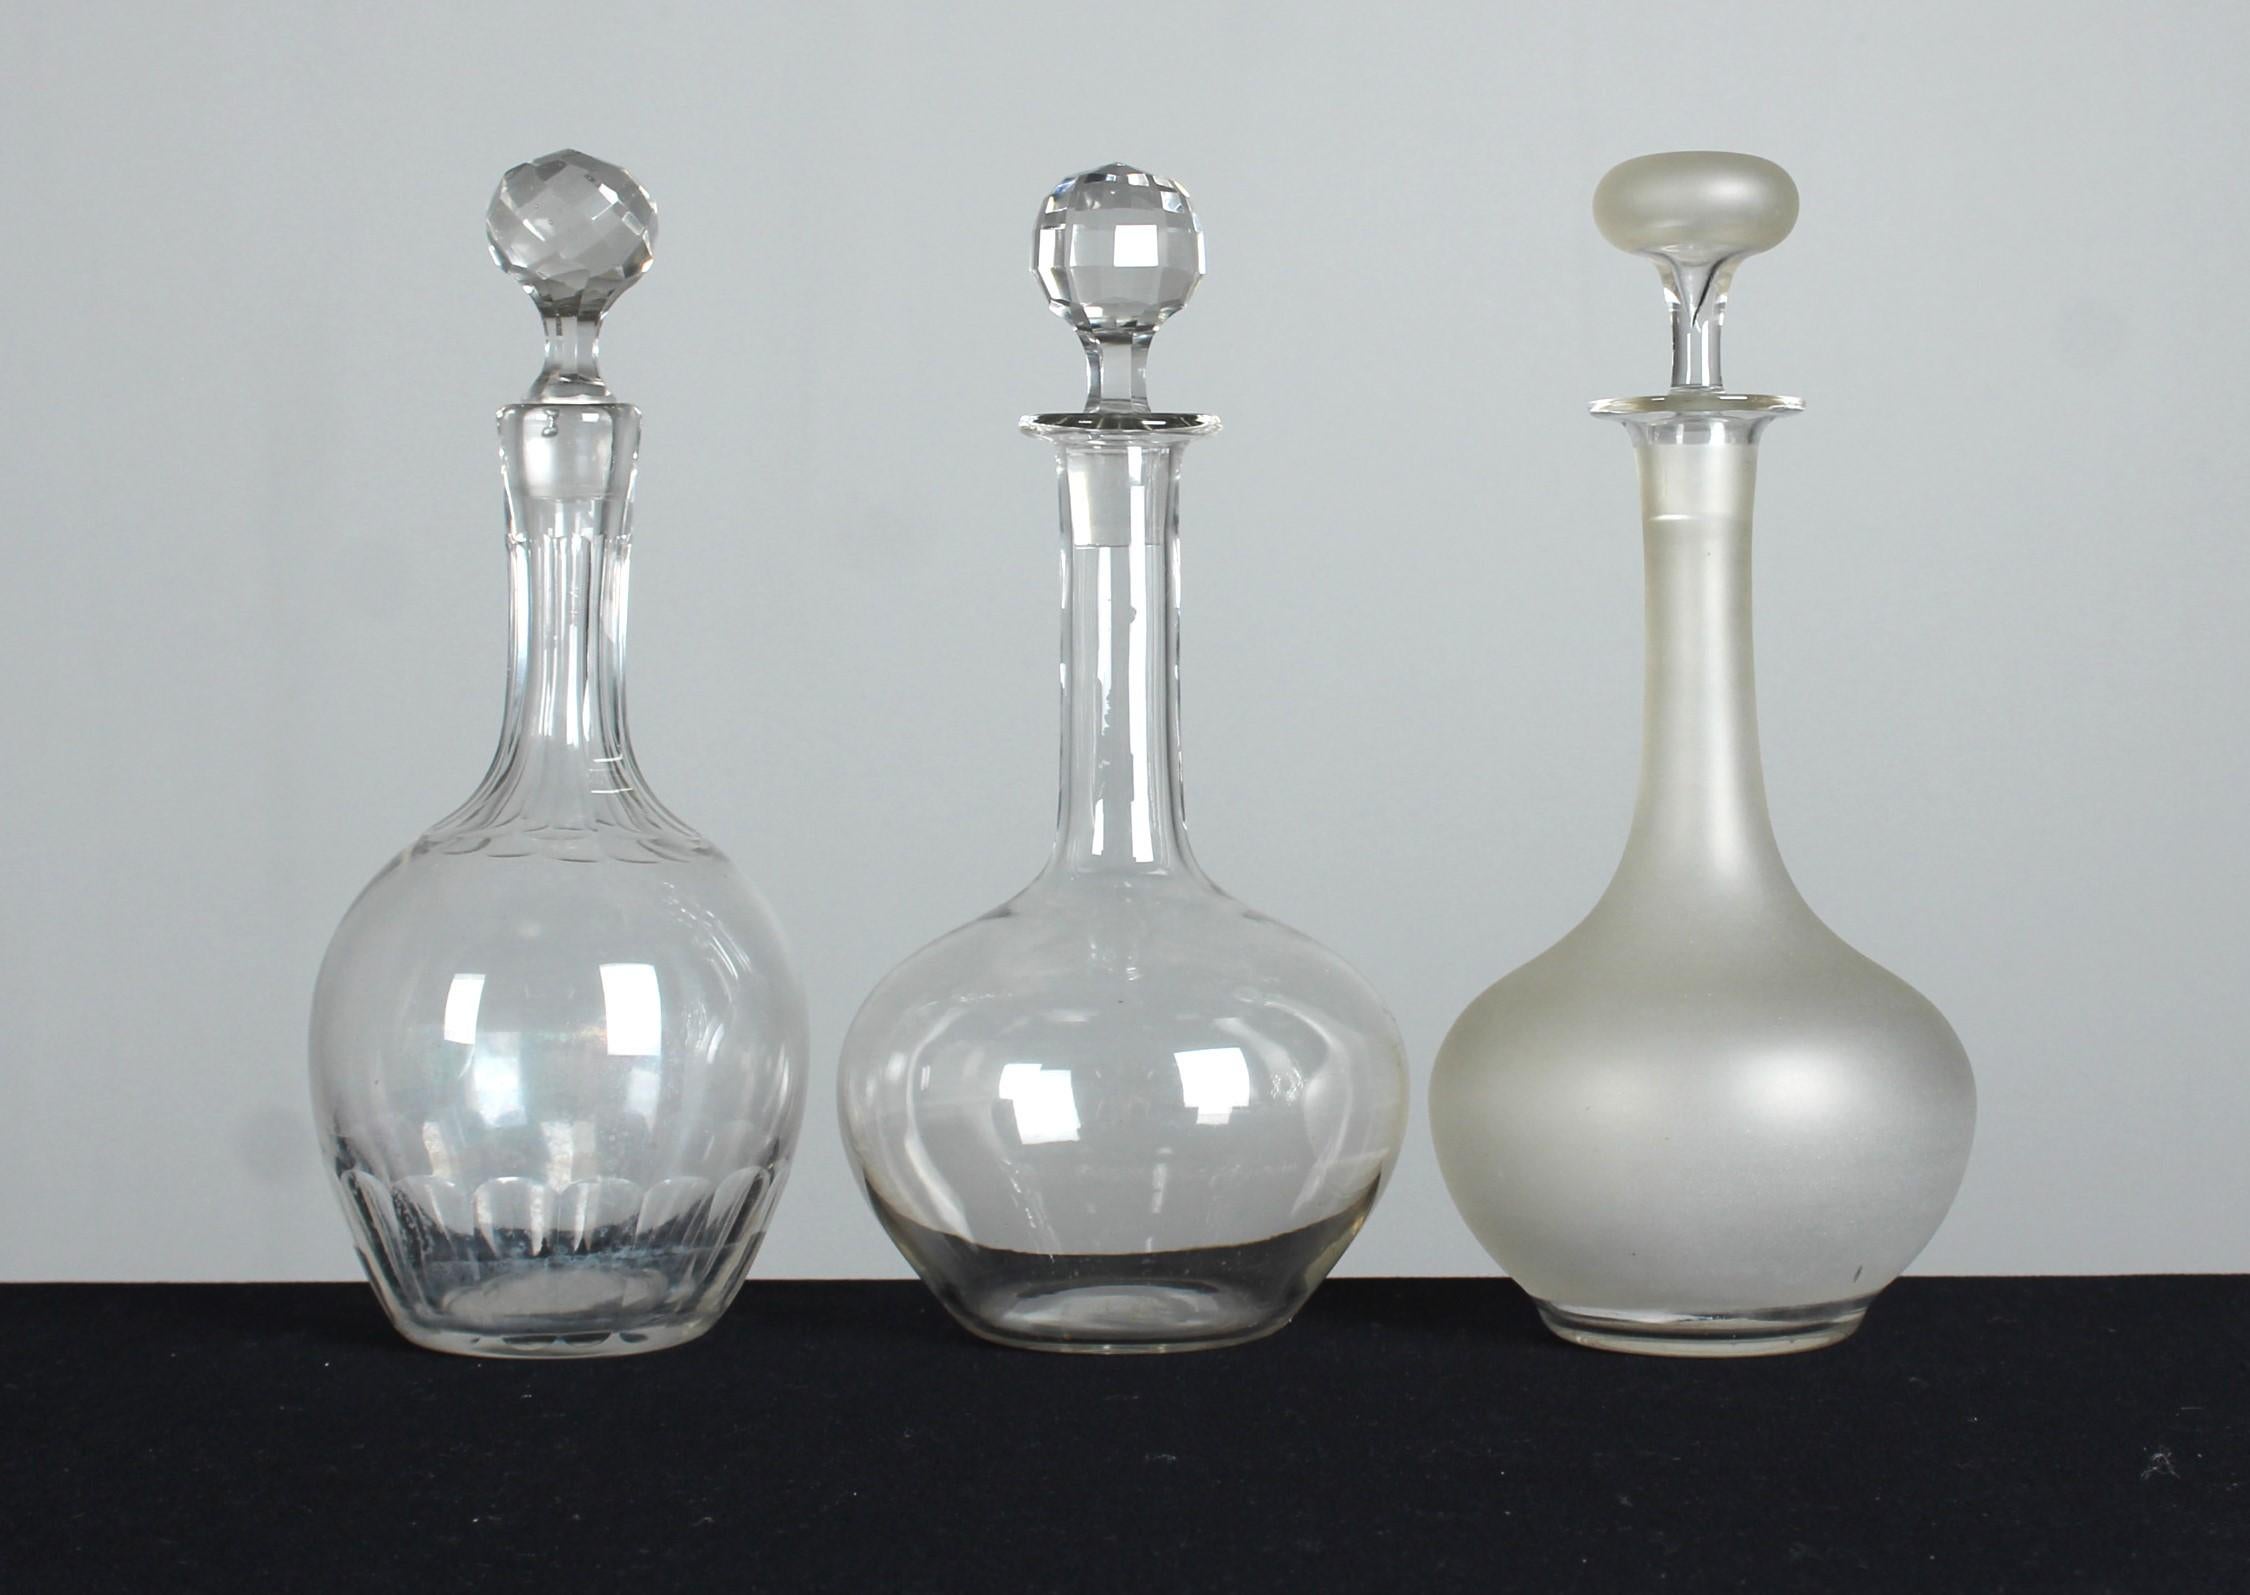 A beautiful, unique set of three antique carafes, France, 20th century.

In France at the beginning of the 20th century carafes experienced a highlight of elegance and sophistication. This period, often known as the Belle Époque, was characterized